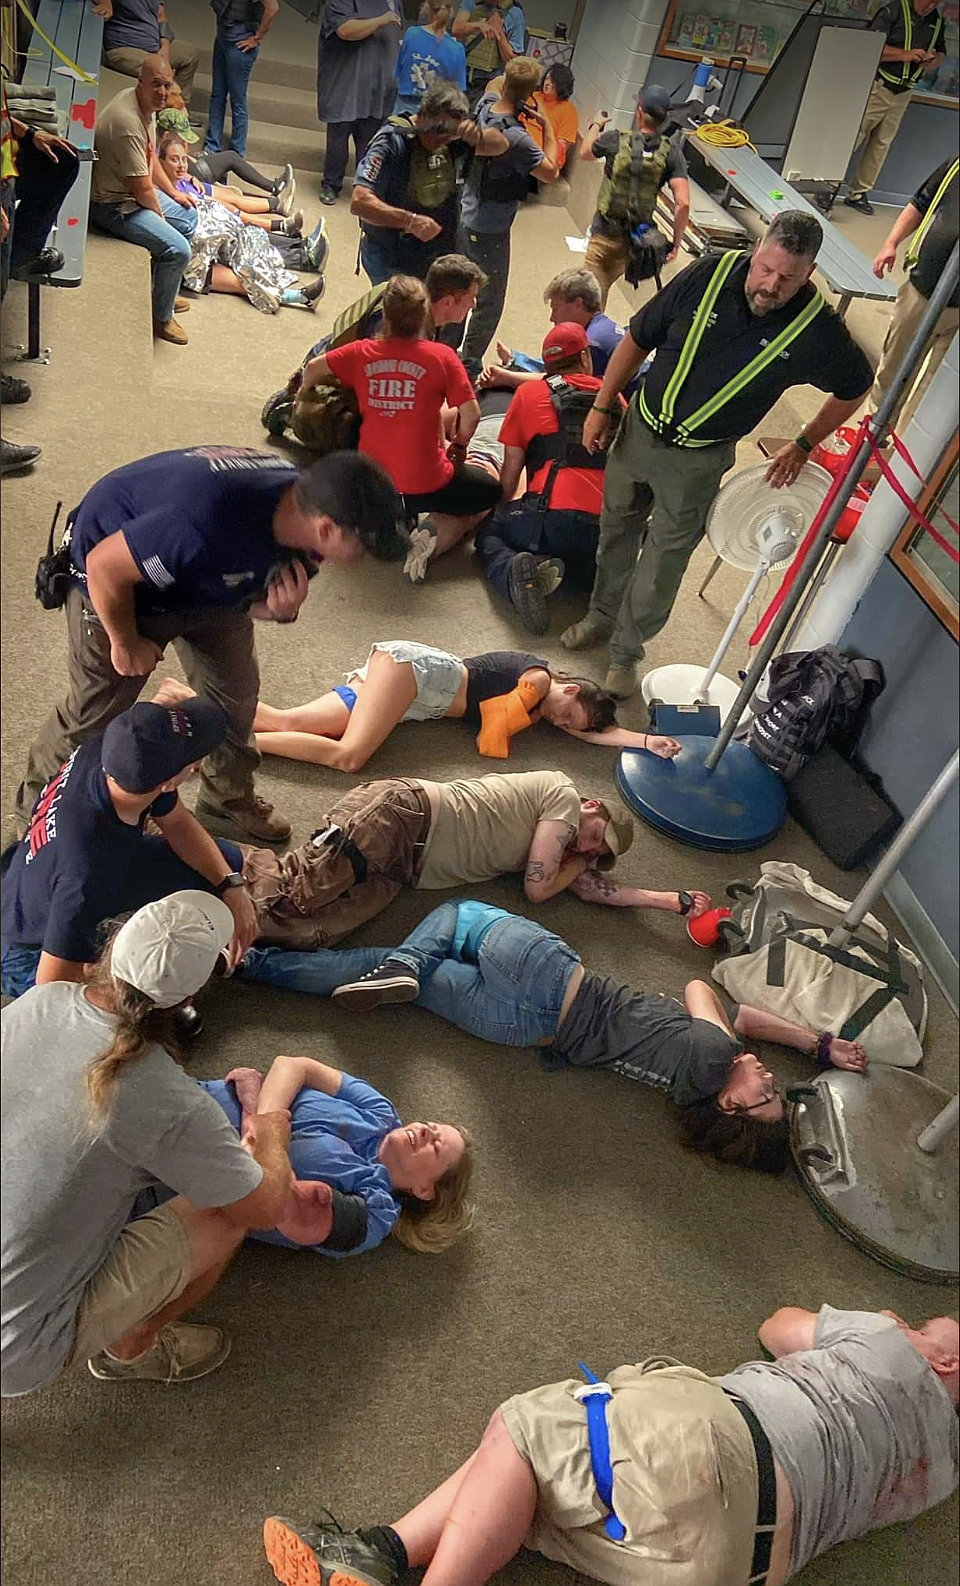 Silverback instructor Michael Wisner (center right in reflective vest) oversees local EMS crews treating 'patients' in the casualty collection point during Wednesday's school shooting drill.